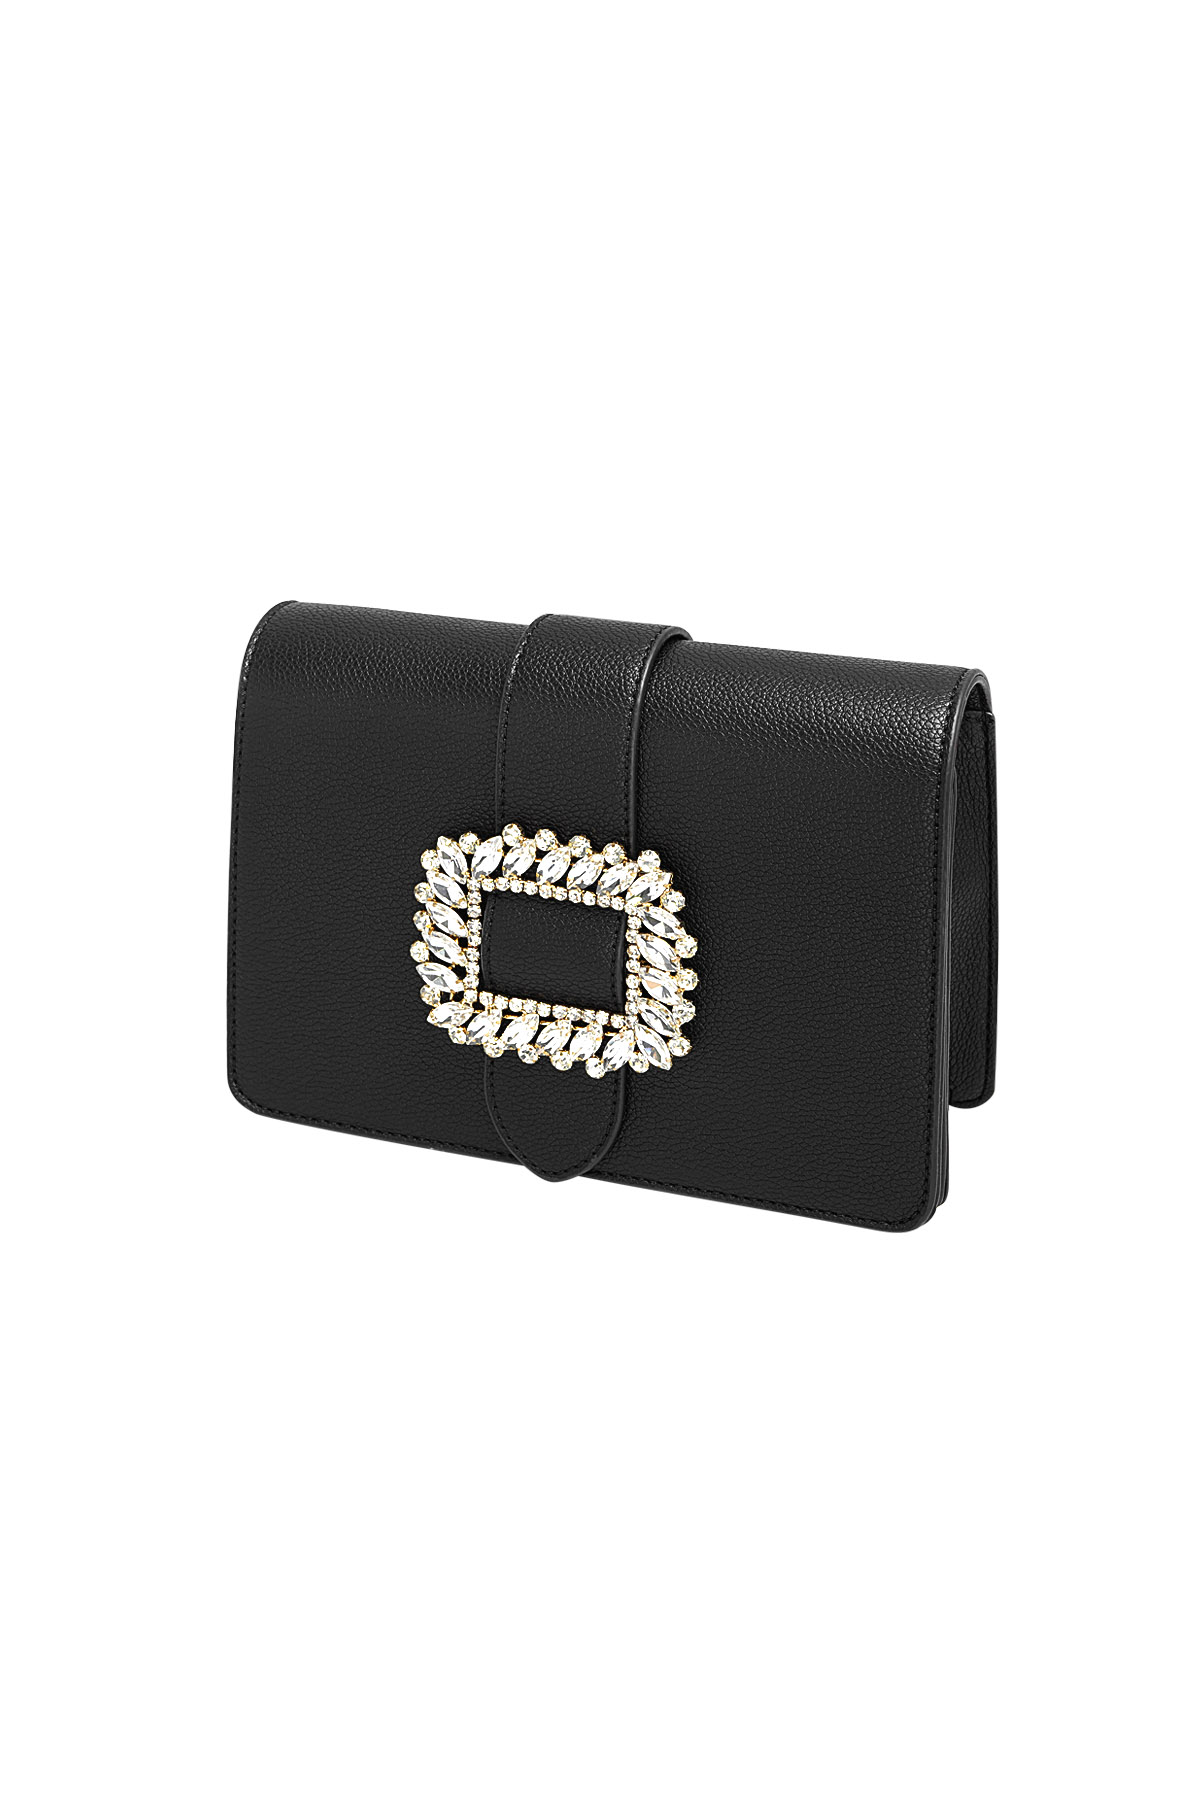 Bag buckle classy - black Picture3